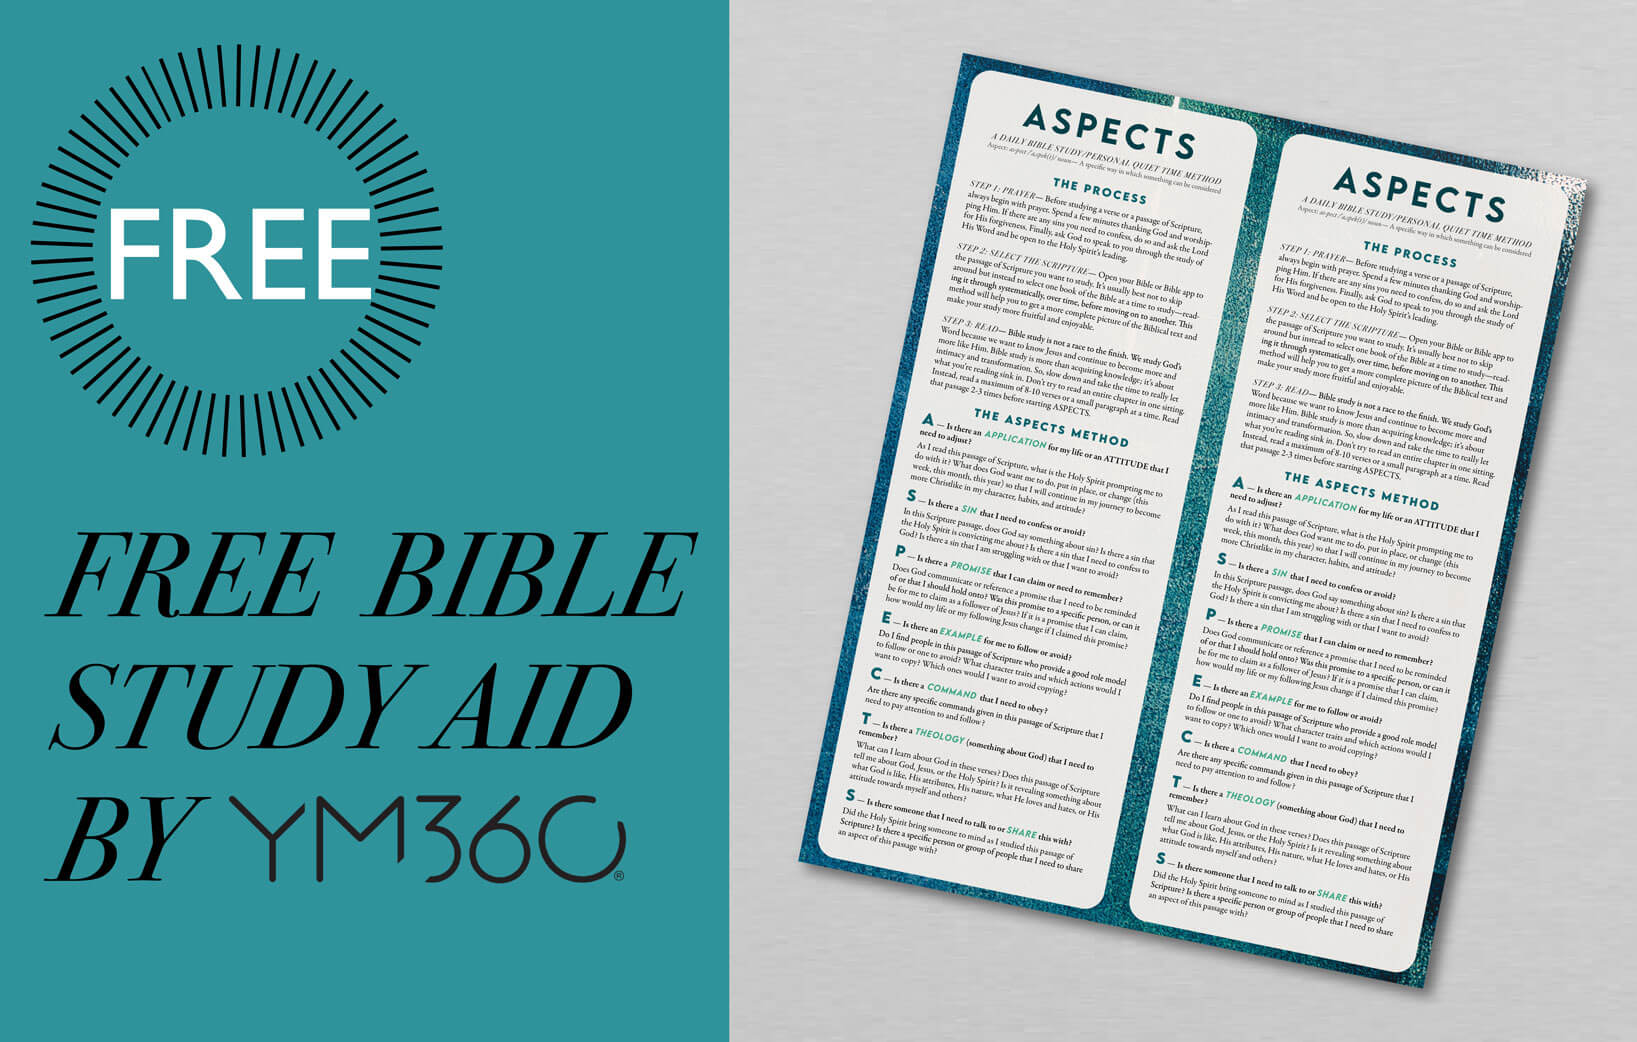 ASPECTS—A Daily Bible Study/Personal Quiet Time Method